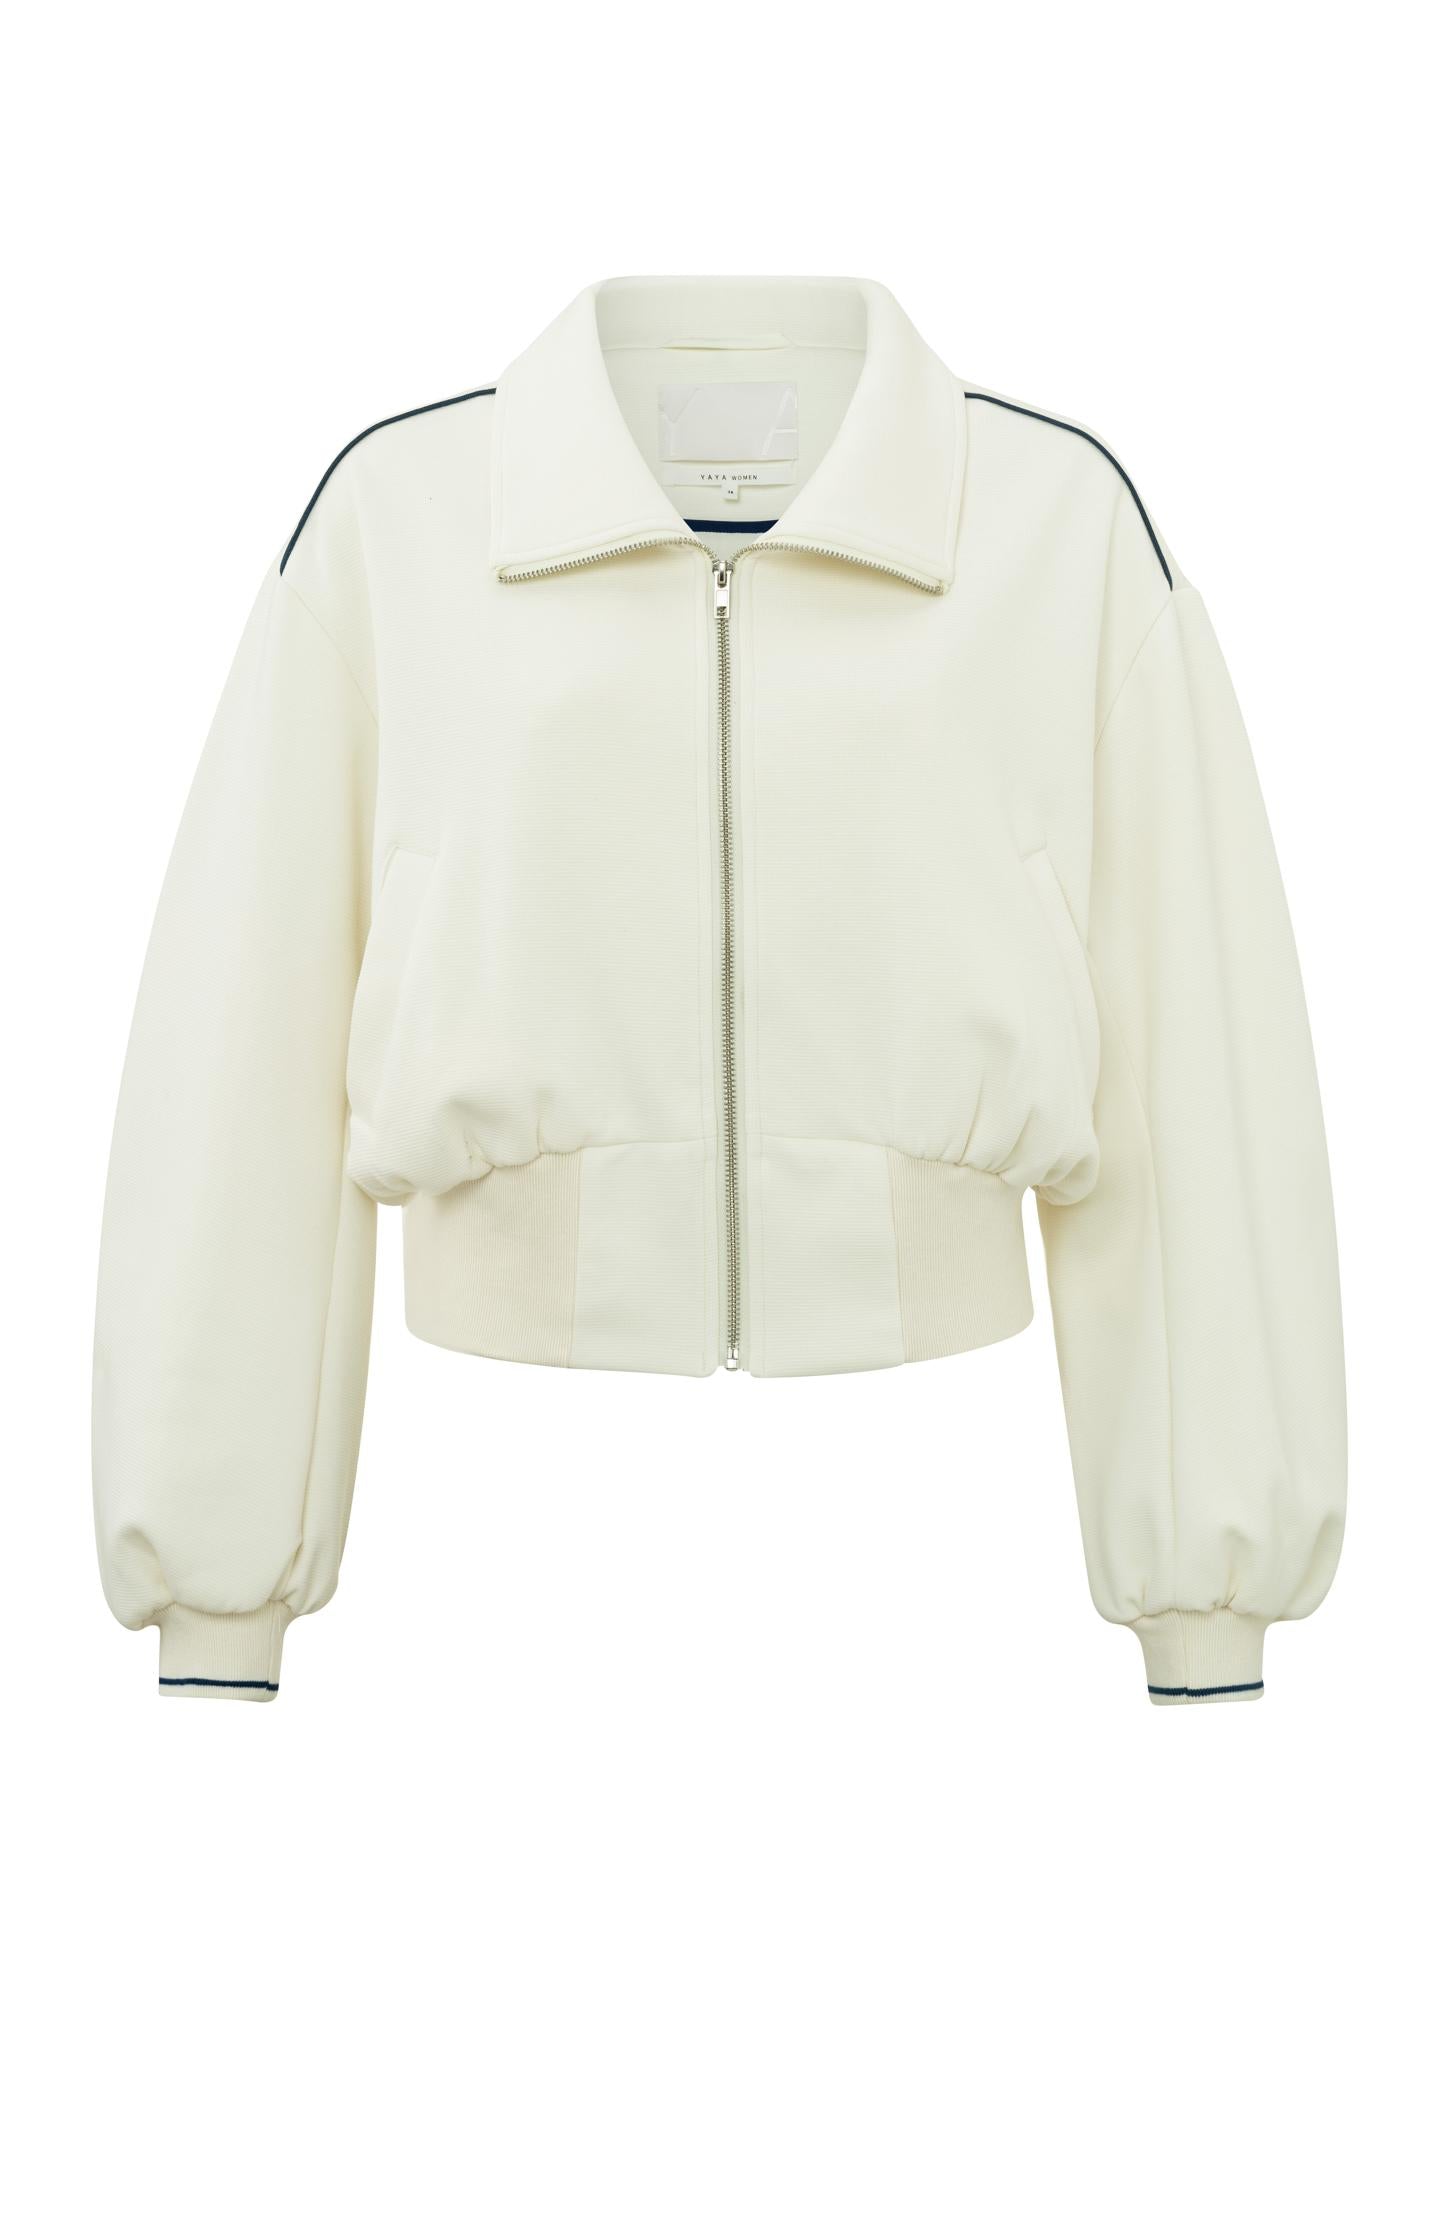 Cropped jersey jacket with collar and long balloon sleeves - Type: product